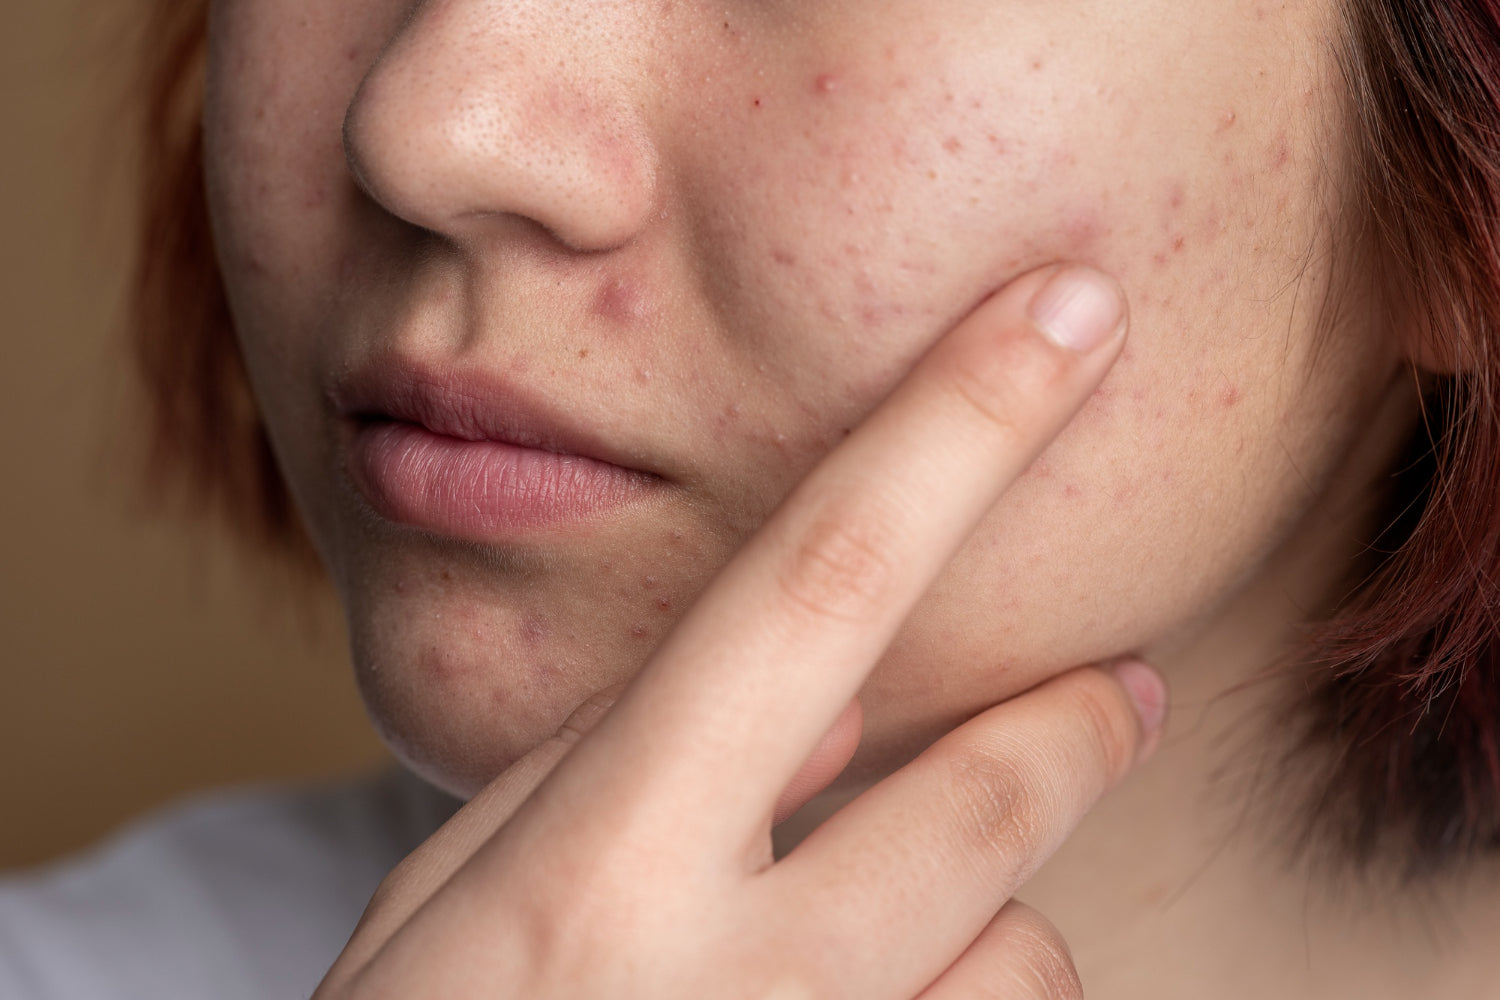 Skin with rosacea